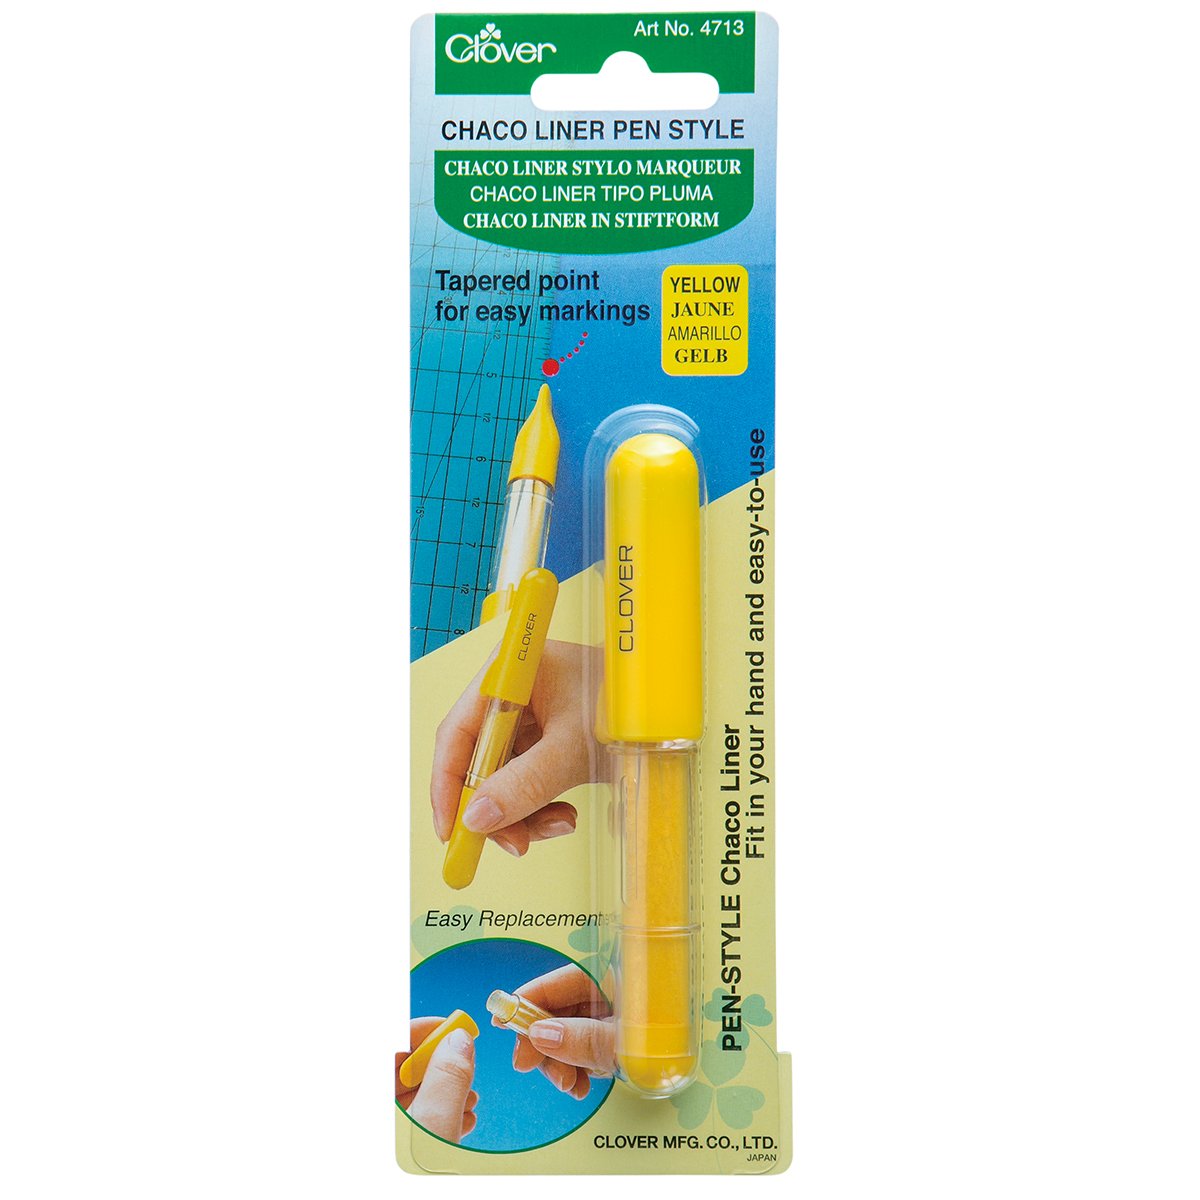 CLV - Chaco Liner Pen Style (Yellow)